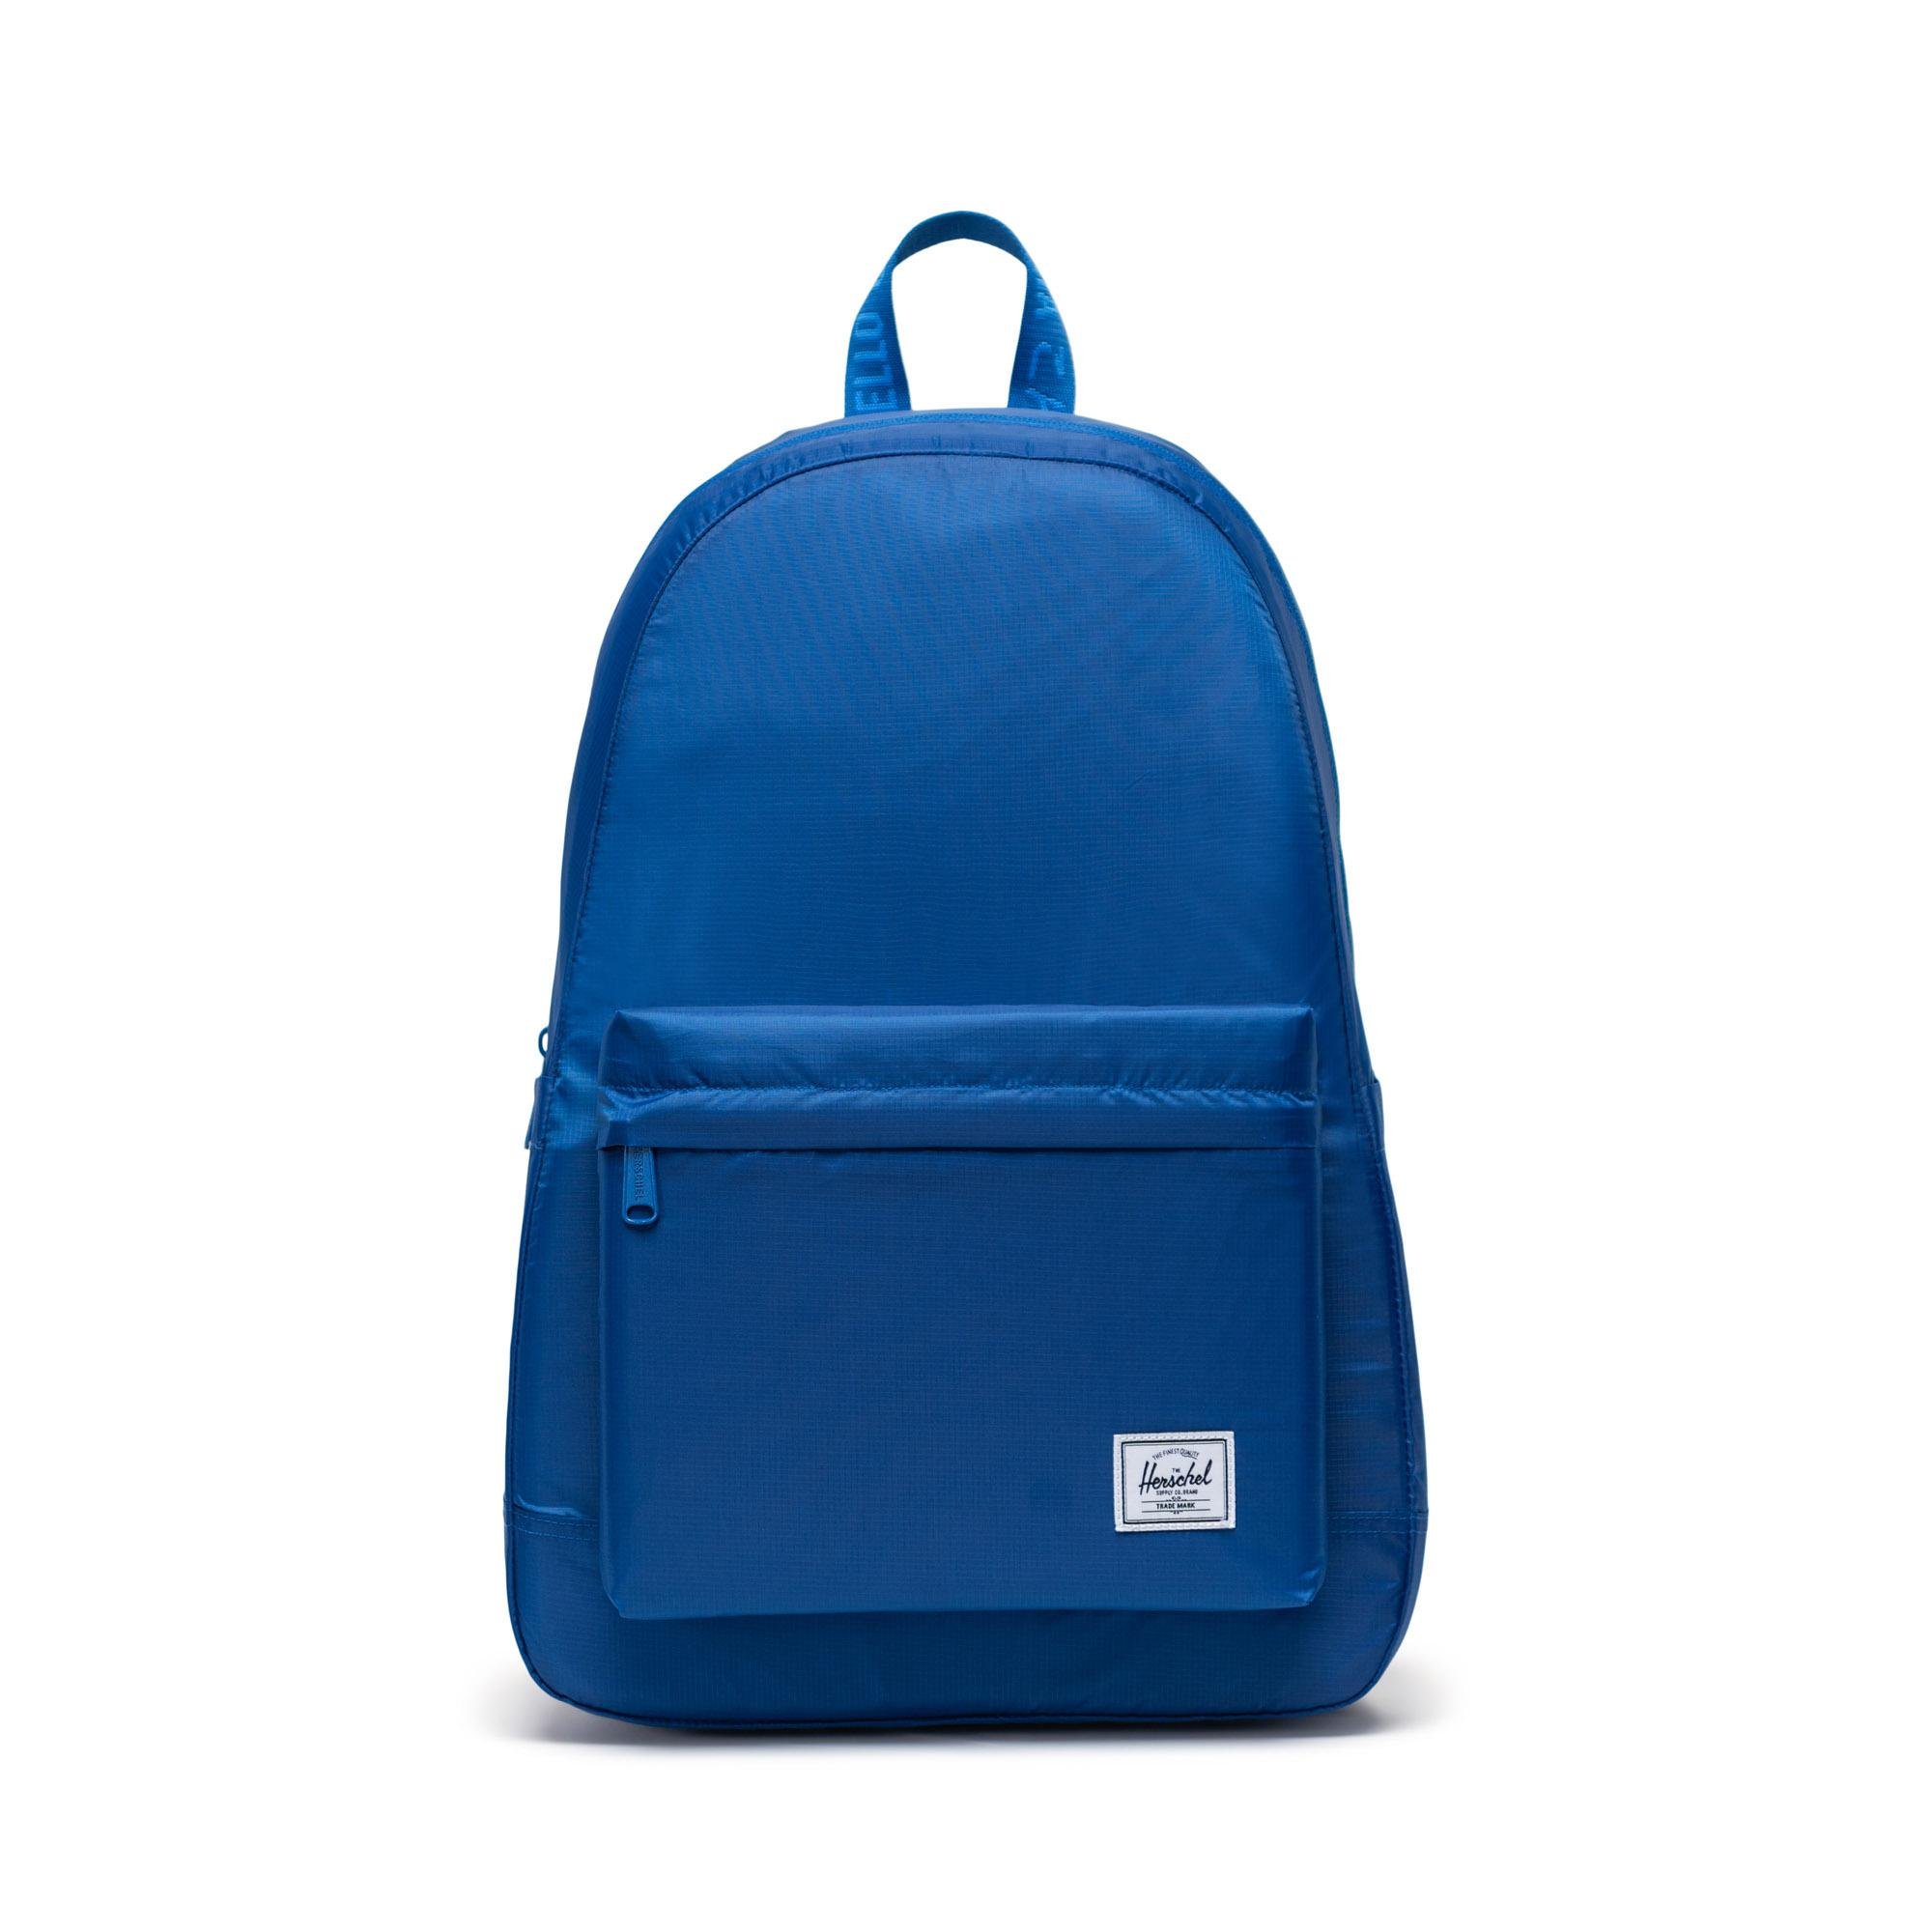 Rome Backpack | Packable - 21.3L by HERSCHEL SUPPLY CO